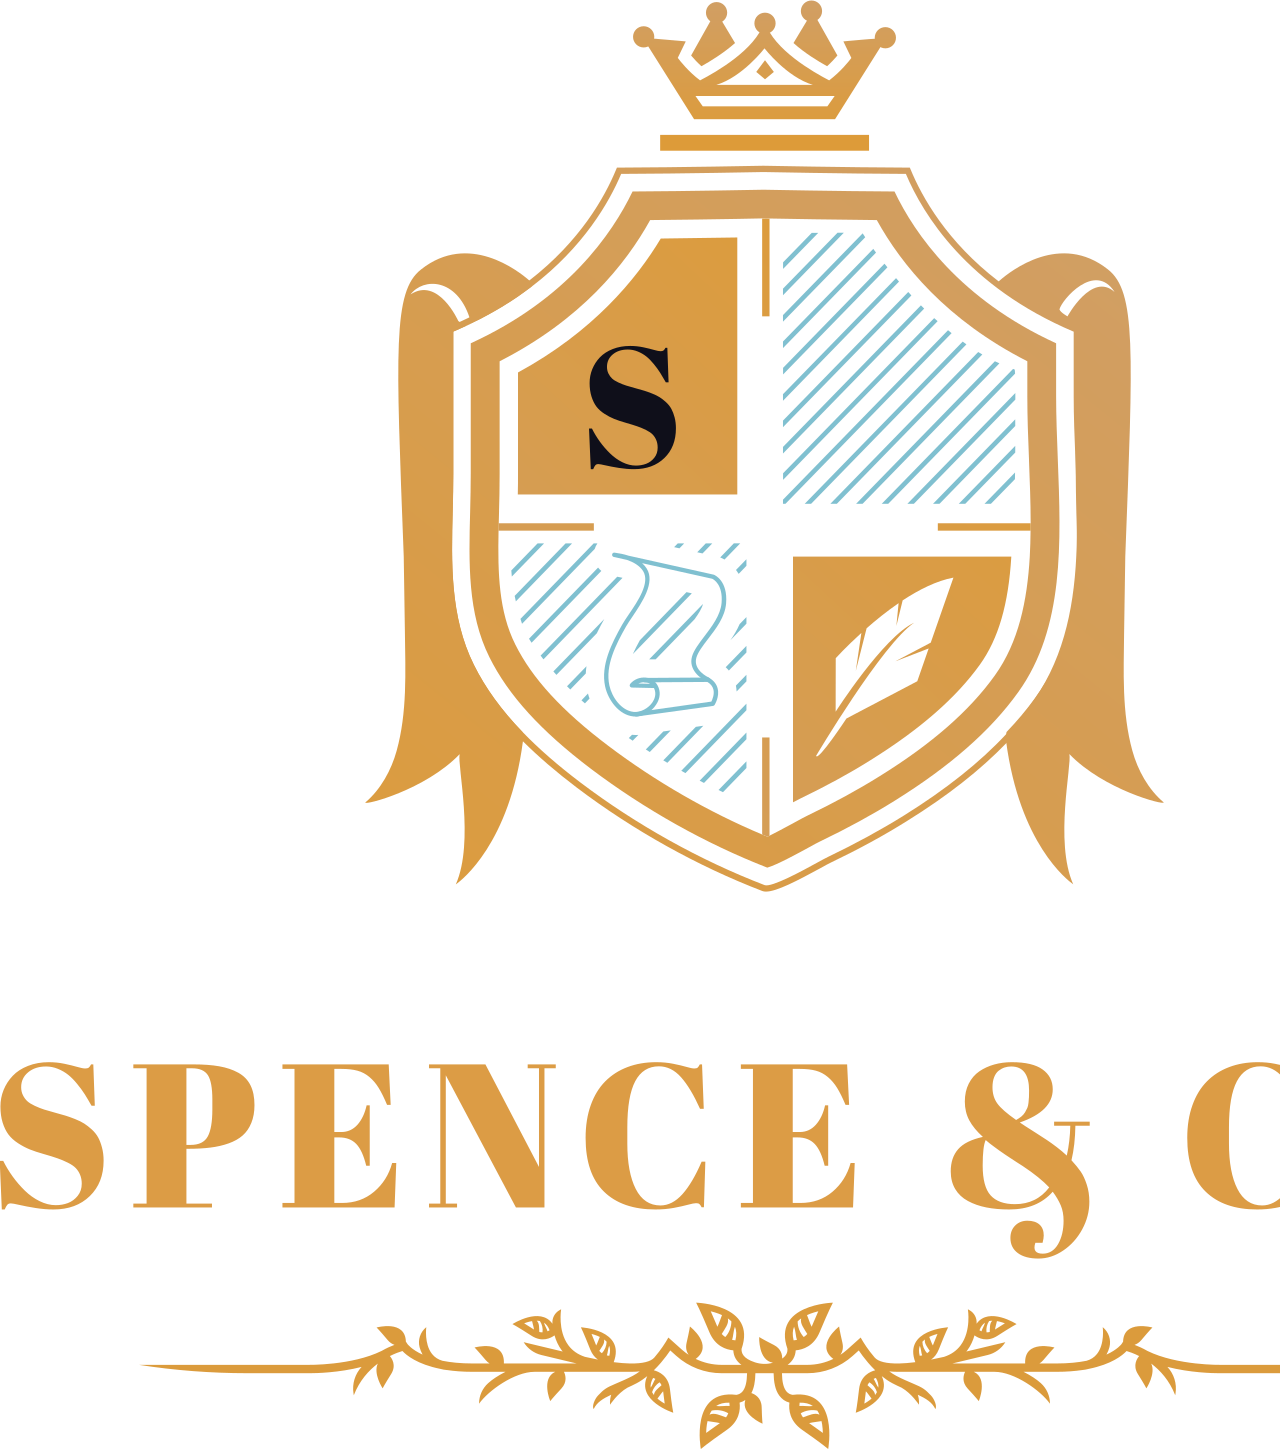 Spence & Co's web page